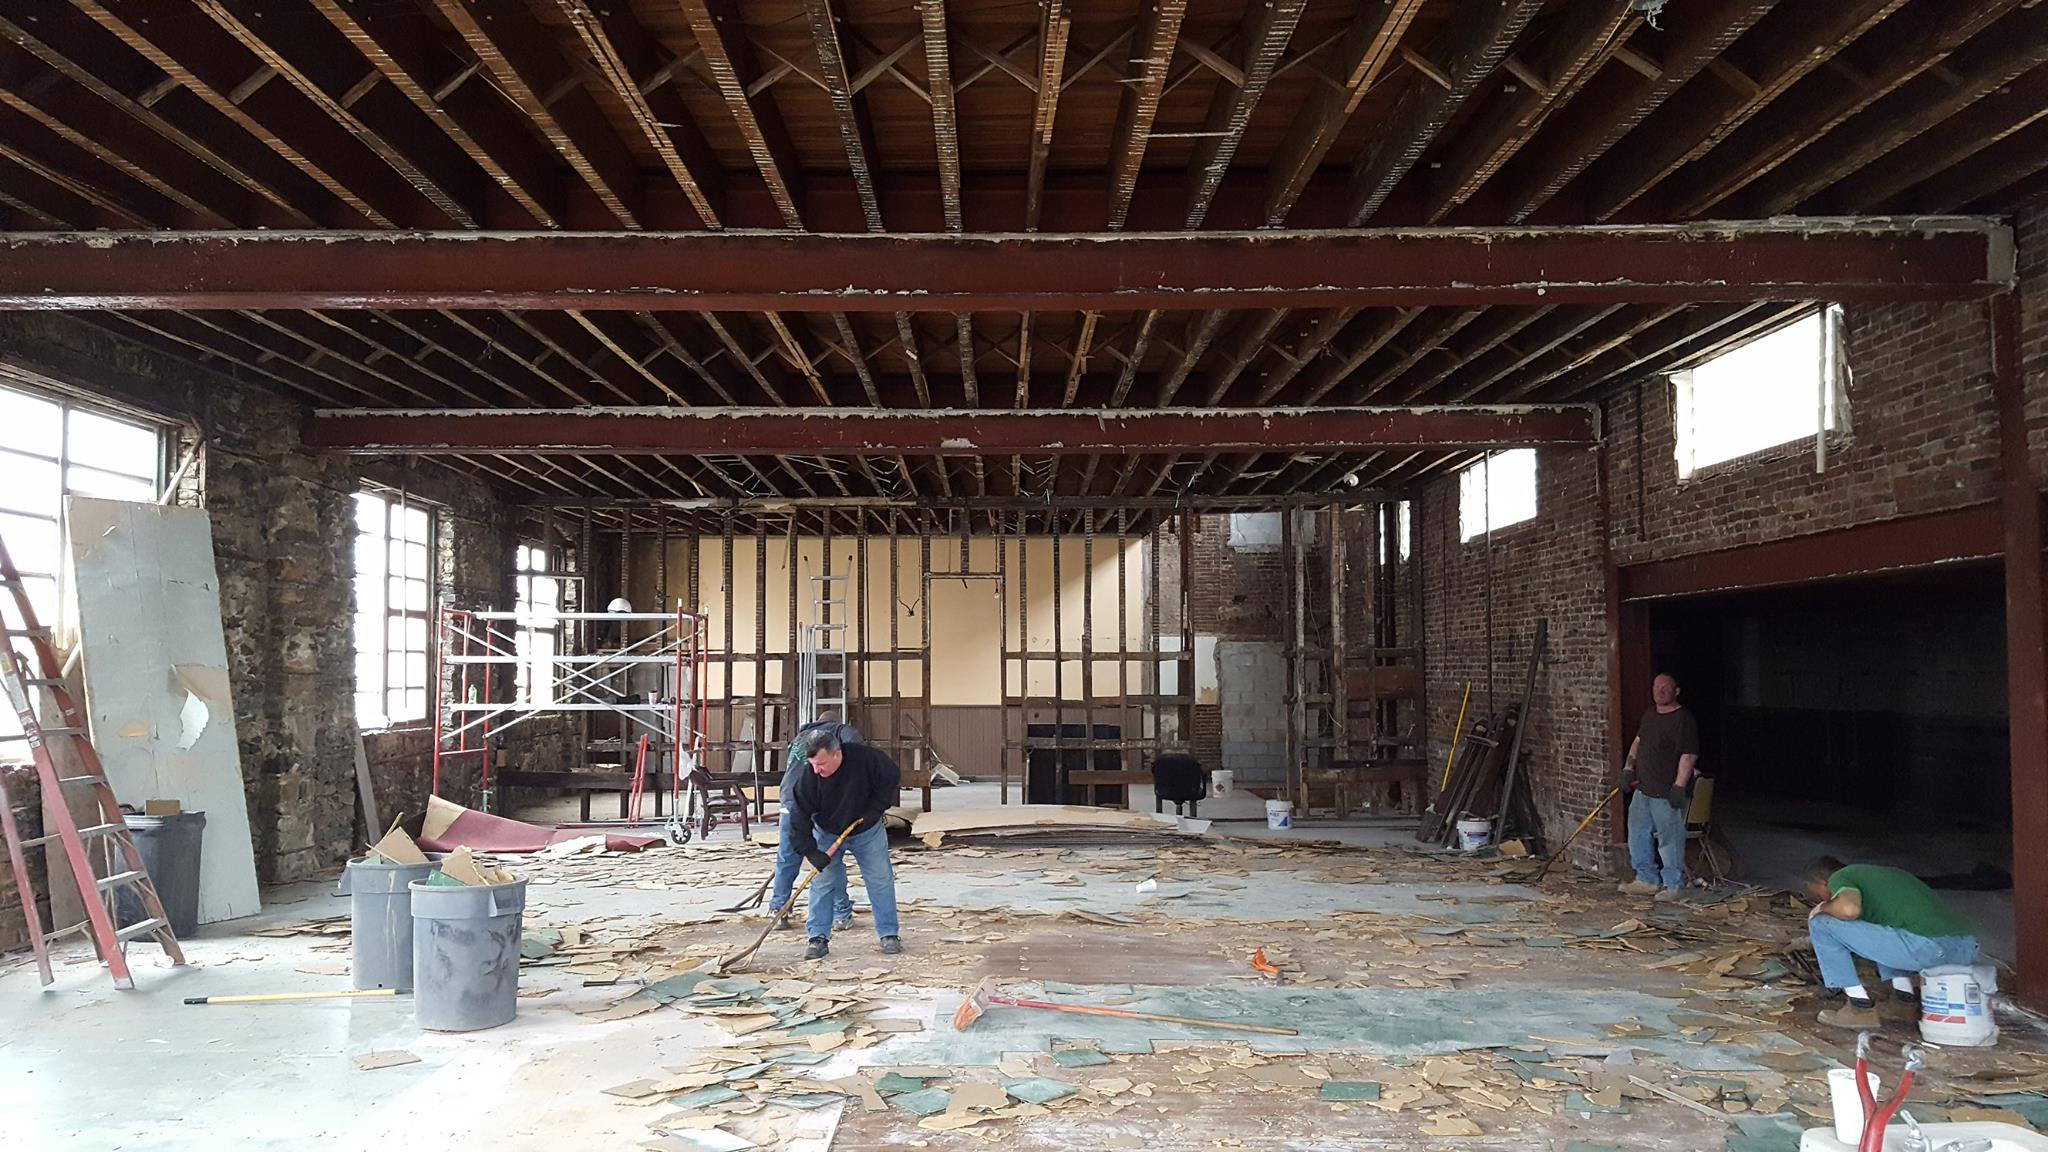 The main space on the first floor during demolition.